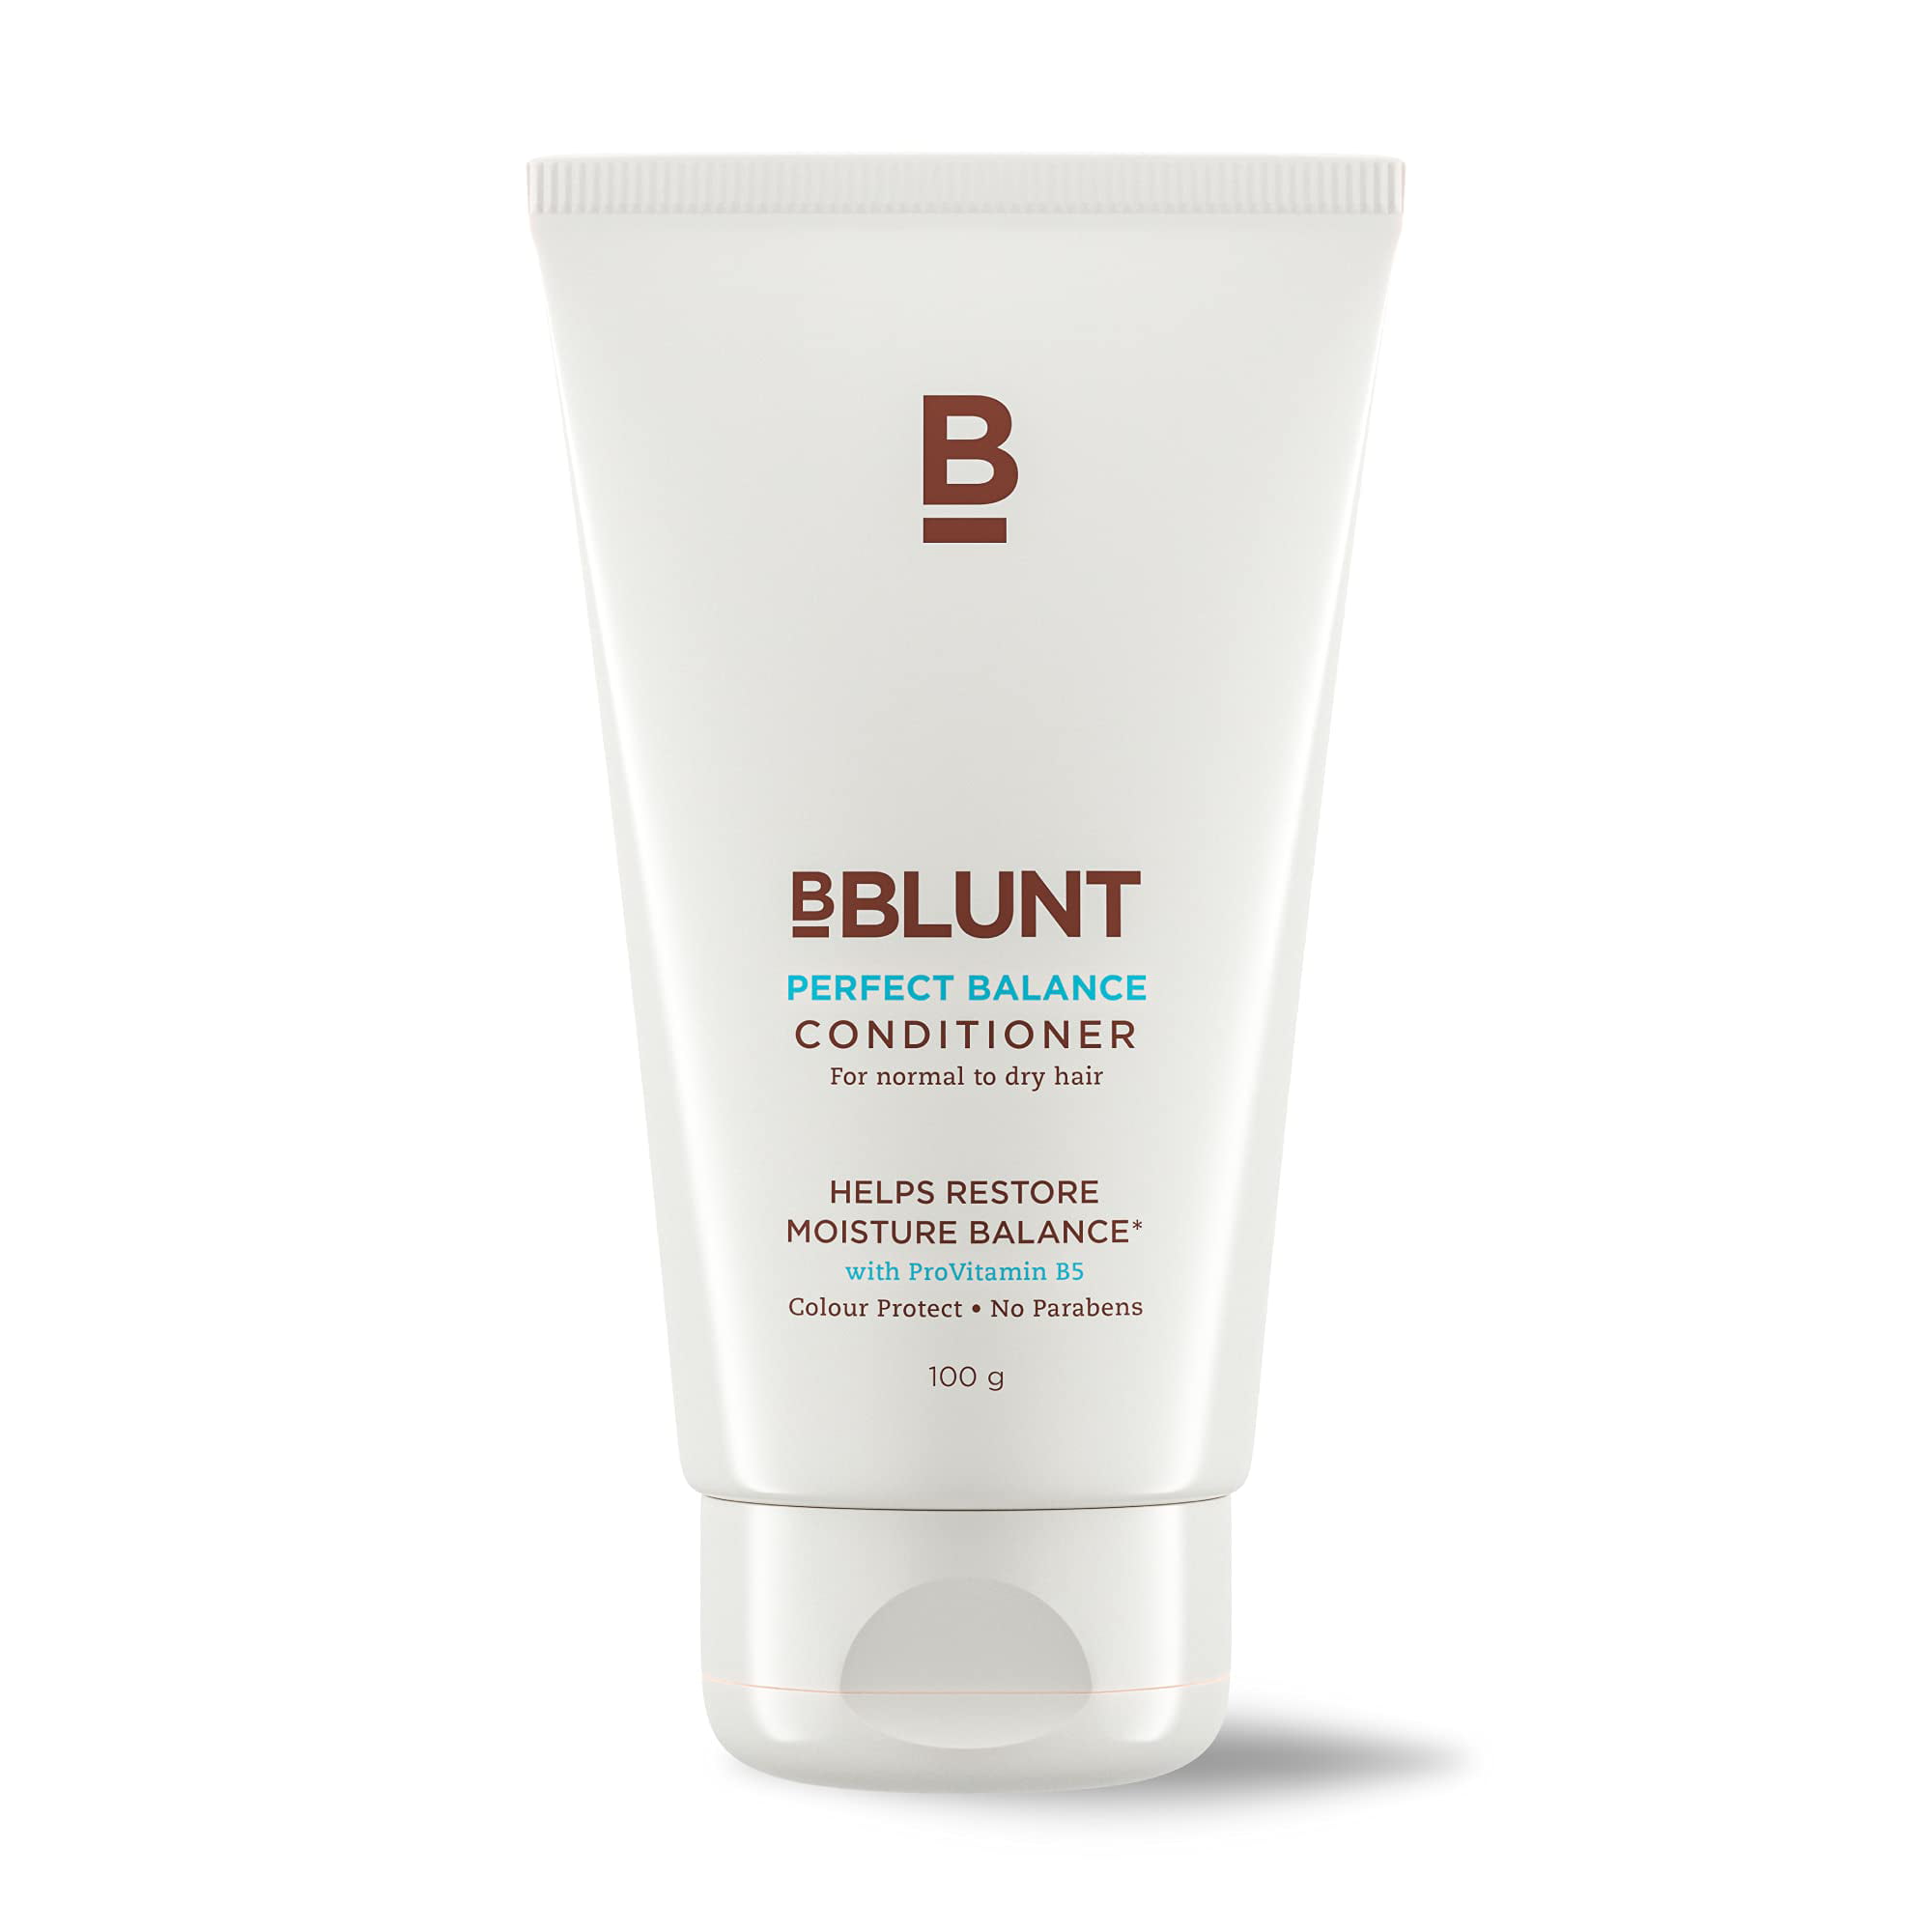 BBLUNT Perfect Balance Conditioner for Normal to Dry Hair - 100g, No  Paraben, No SLS, with Provitamin B5, Unique Colour Protect Formula -  